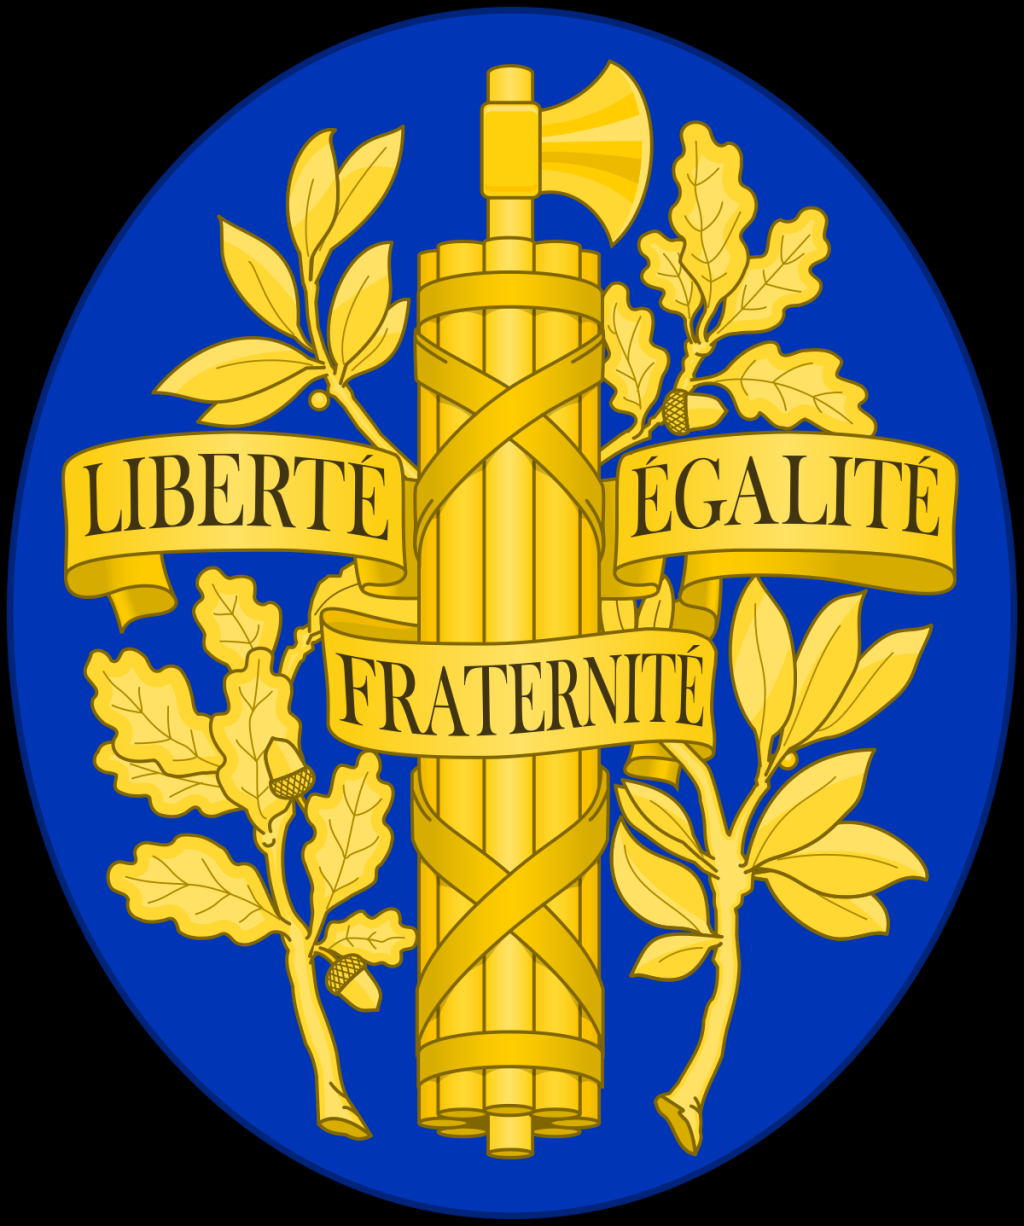 french political beliefs - Politics of France - Wikipedia